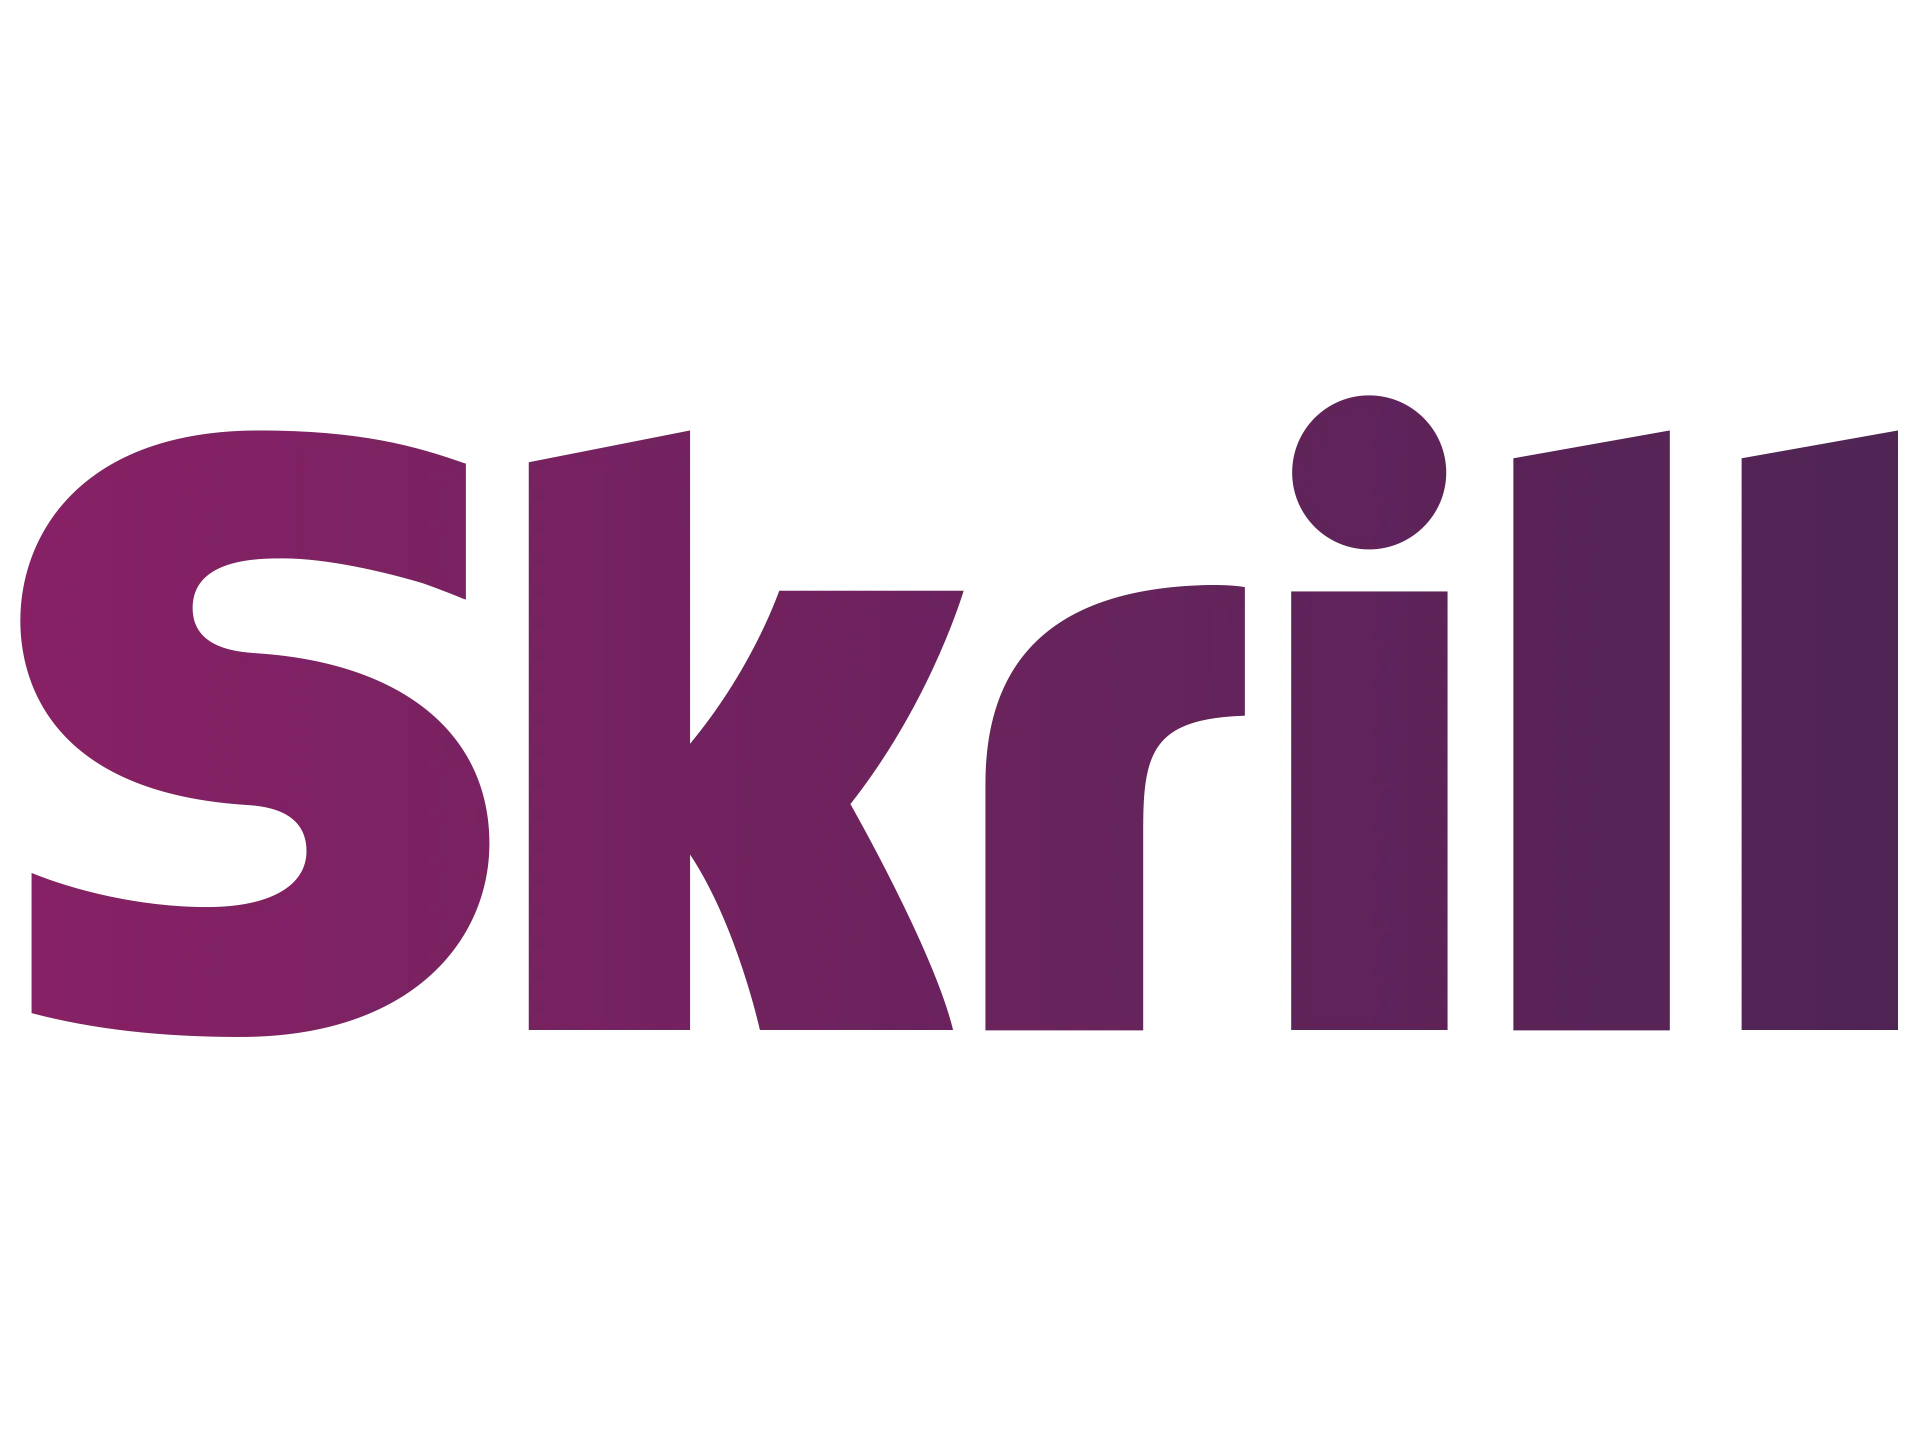 Skrill: licensed e-payment system in India, supports cryptocurrencies, offers payment and money-receiving capabilities.